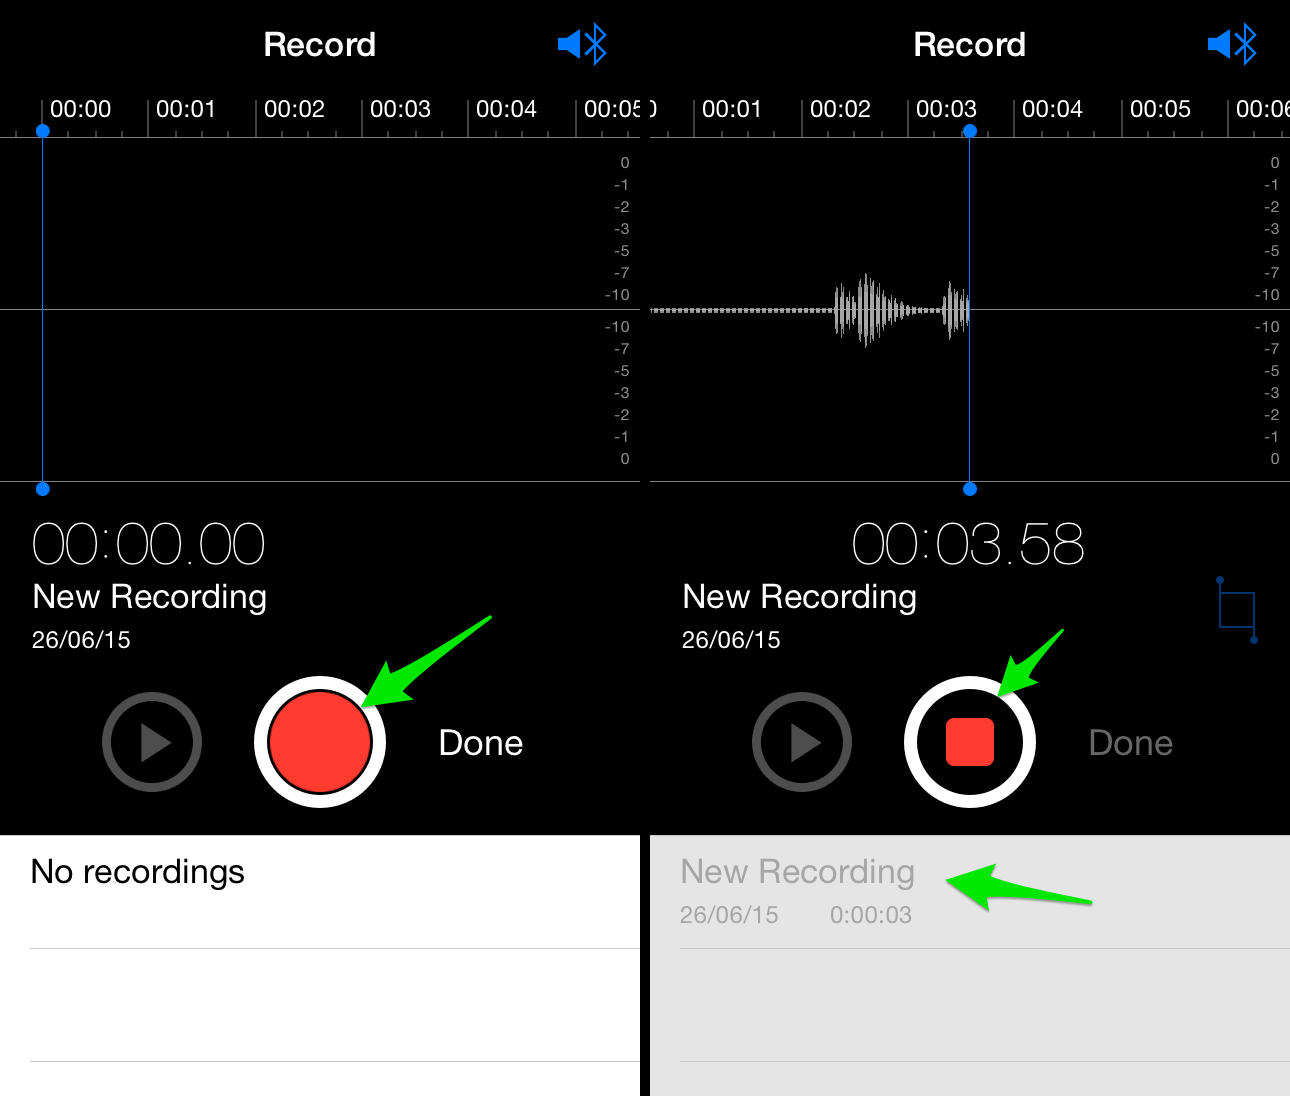 How to Record a Voice Memo on an iPhone in the background